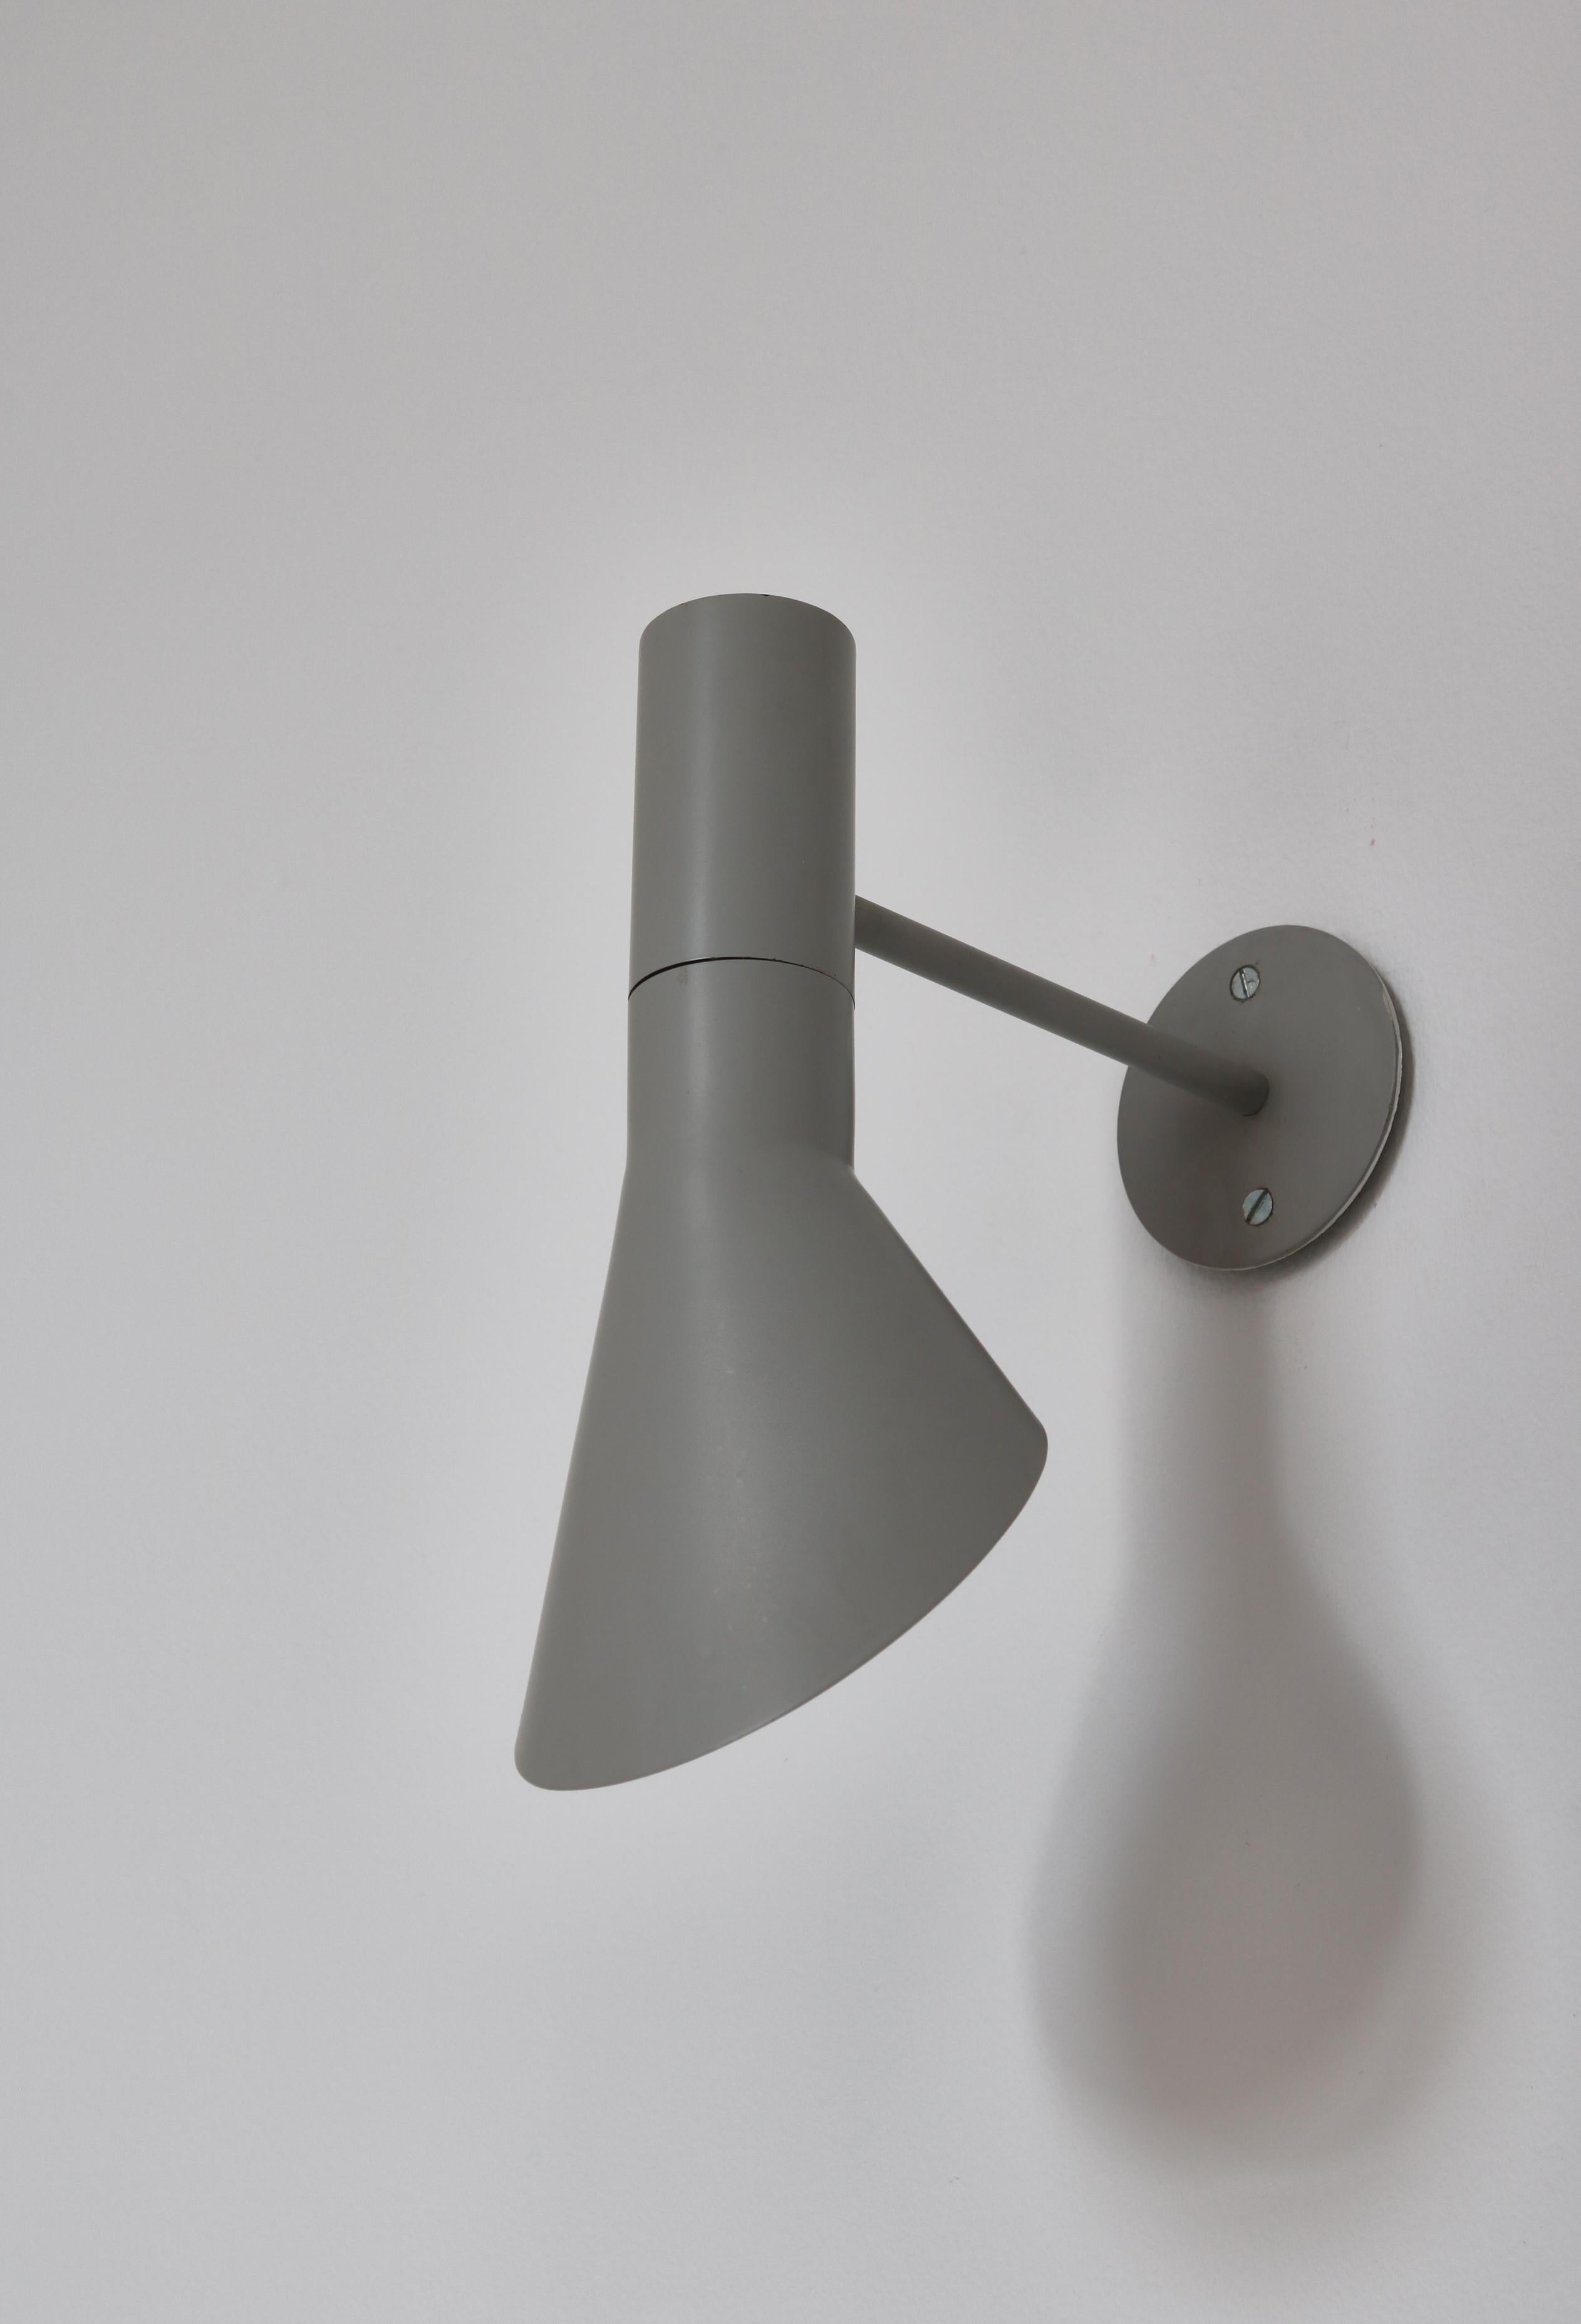 Metal Early Example Arne Jacobsen Visor Wall Lamps in Grey Lacquer Louis Poulsen, 1957 For Sale